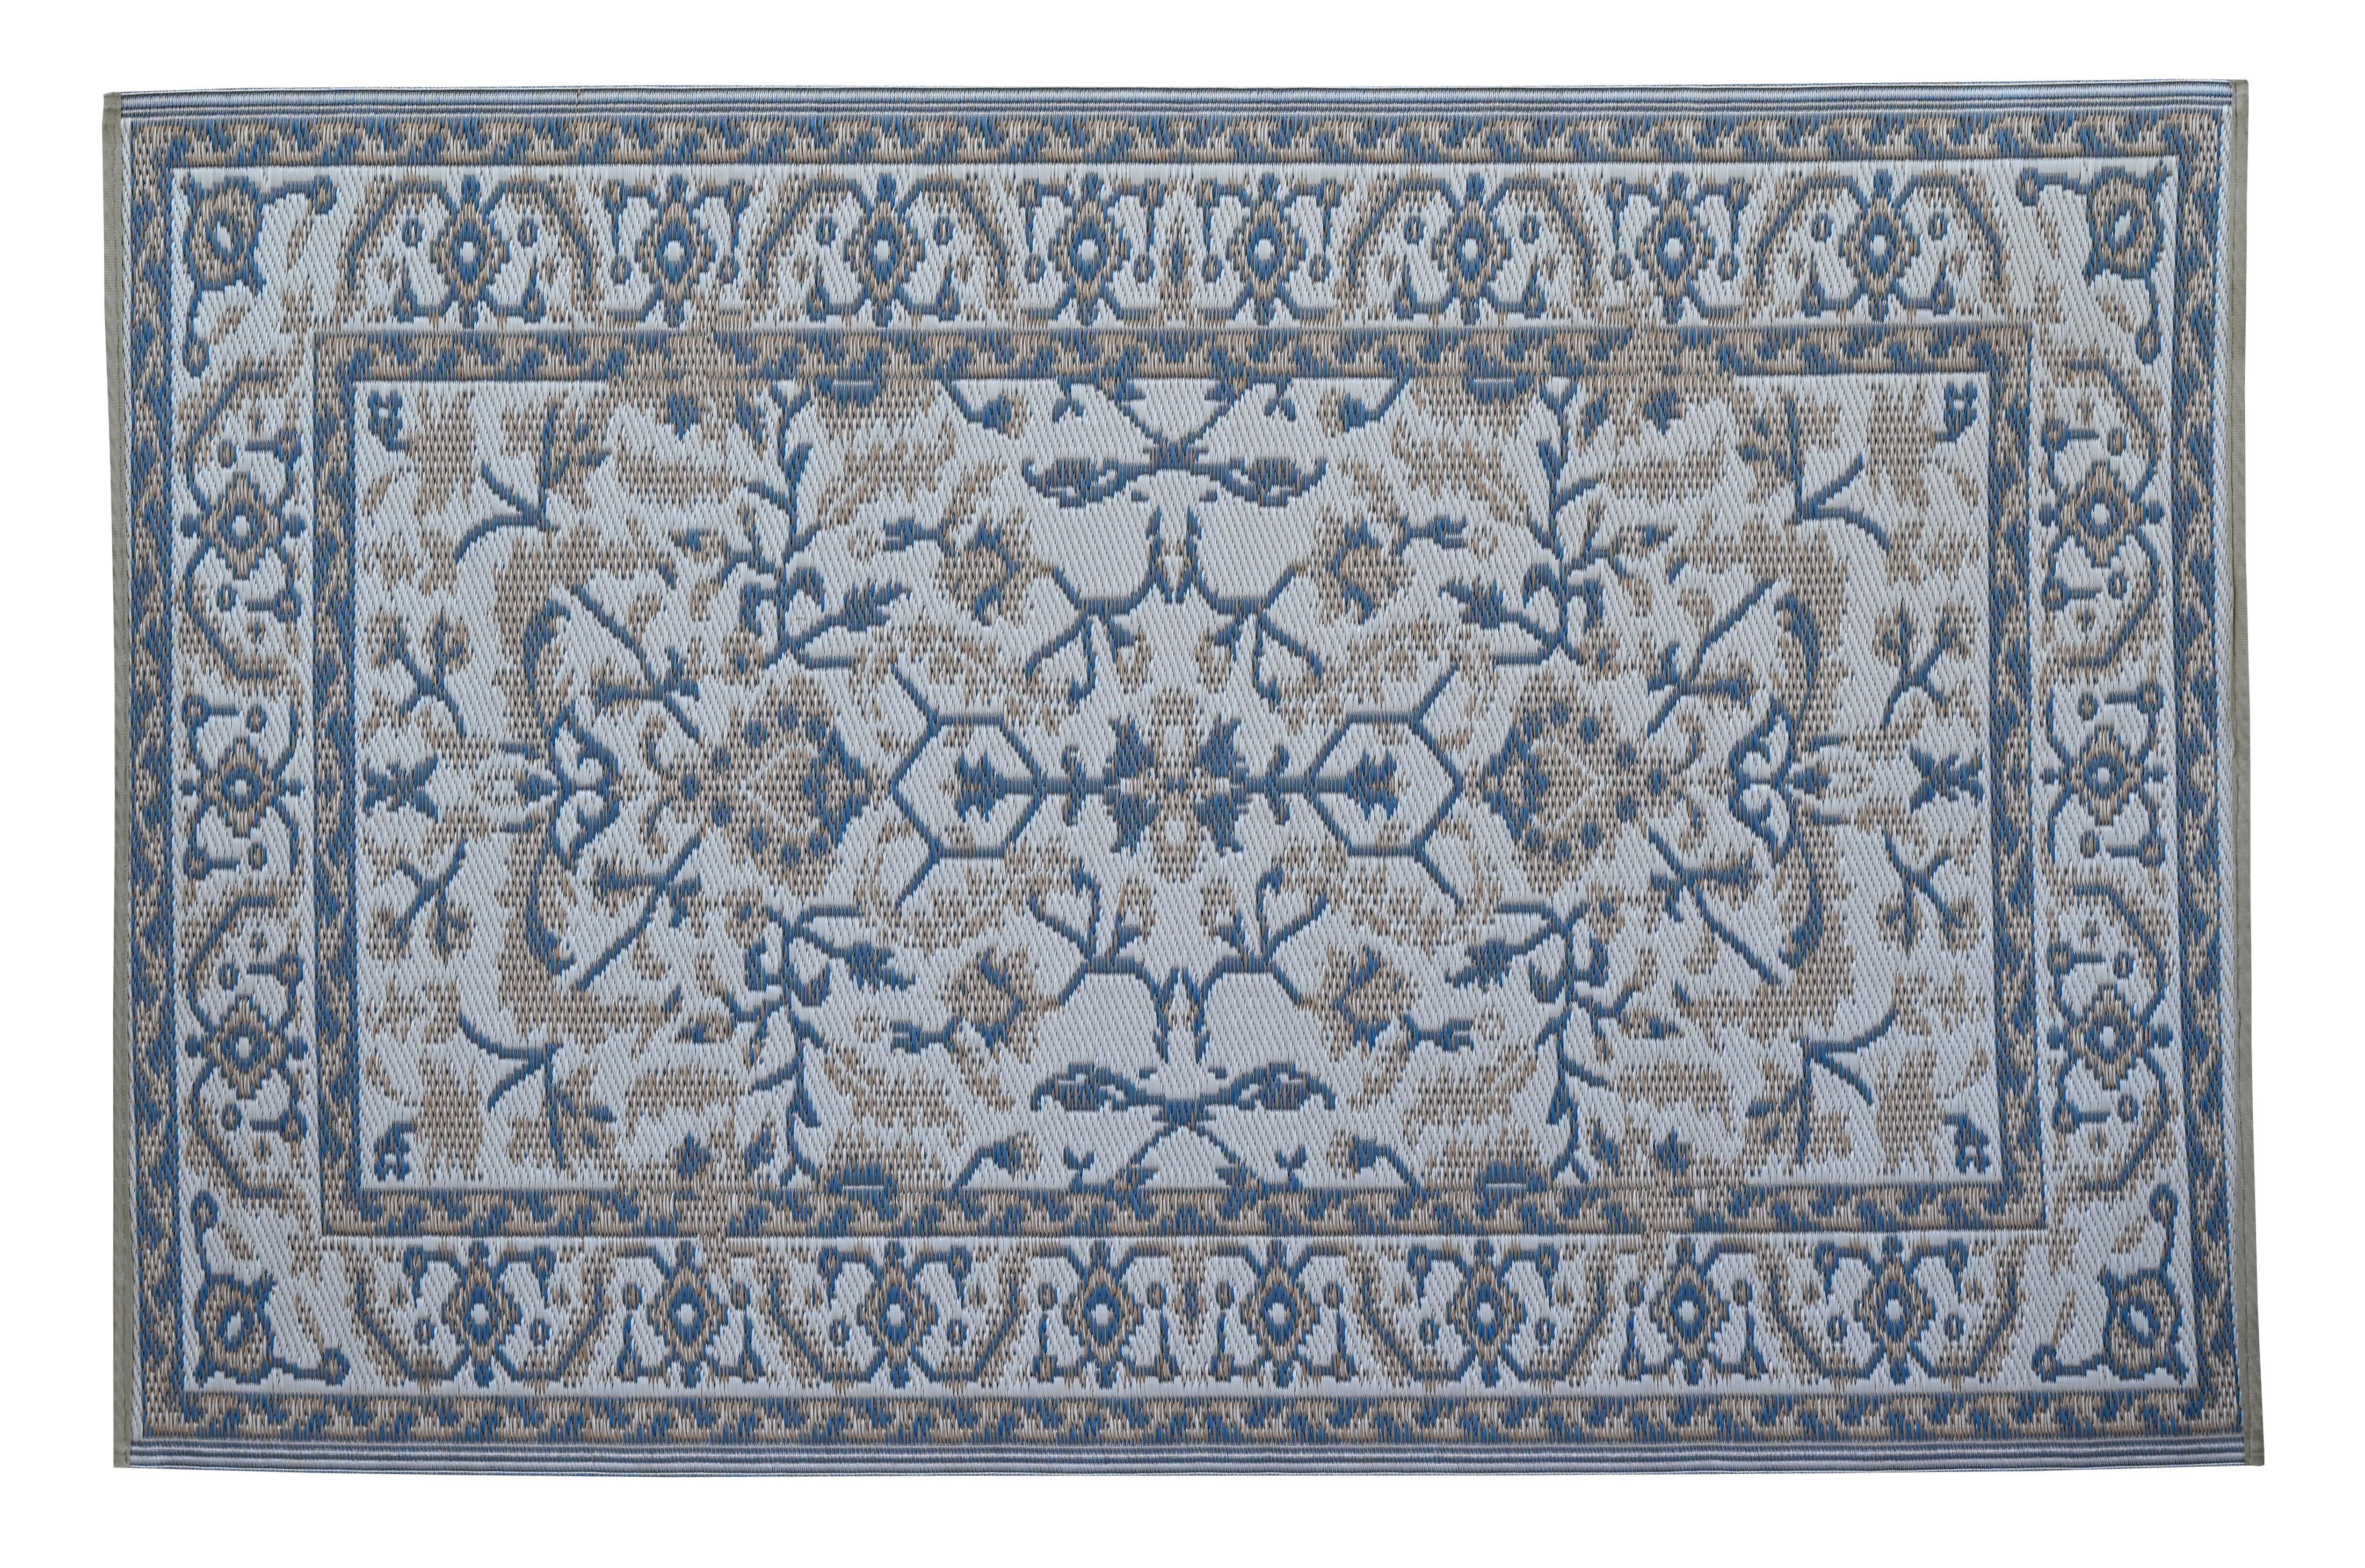 150x238cm Nain Blue Recycled Plastic Outdoor Rug